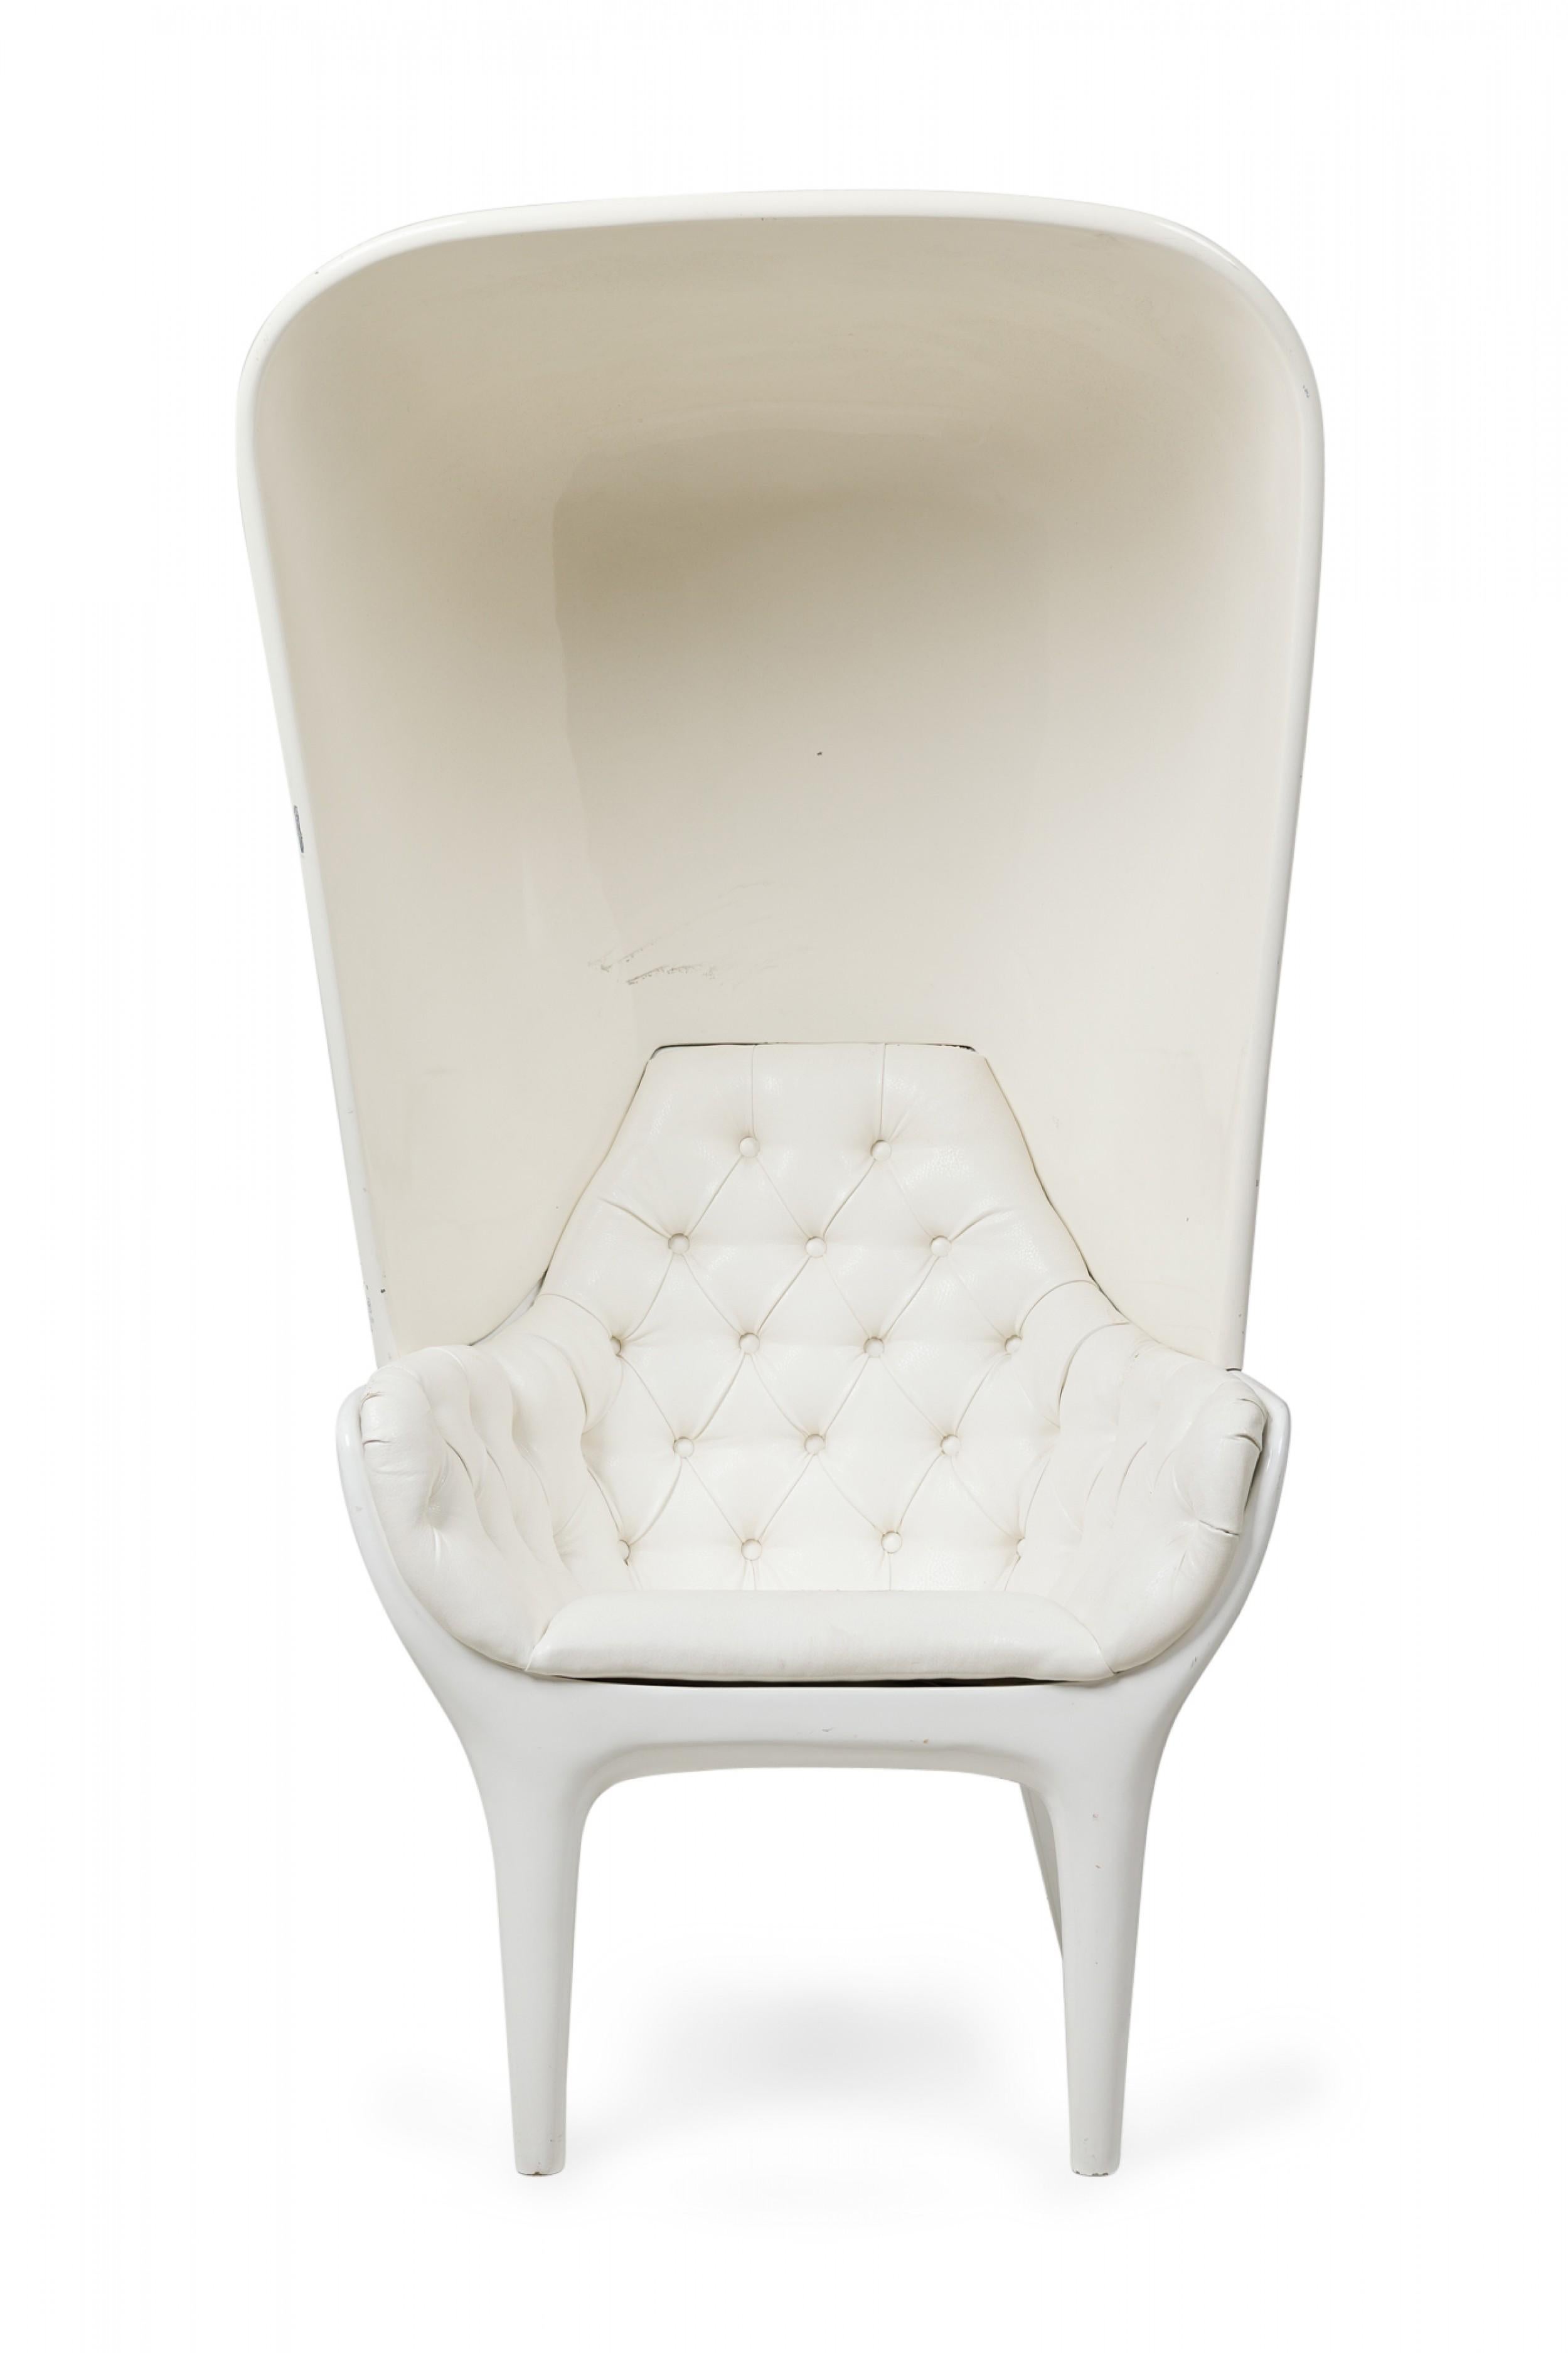 Jaime Hayon Spanish "Showtime" Hooded Armchair, White Lacquered w/ Cover For Sale